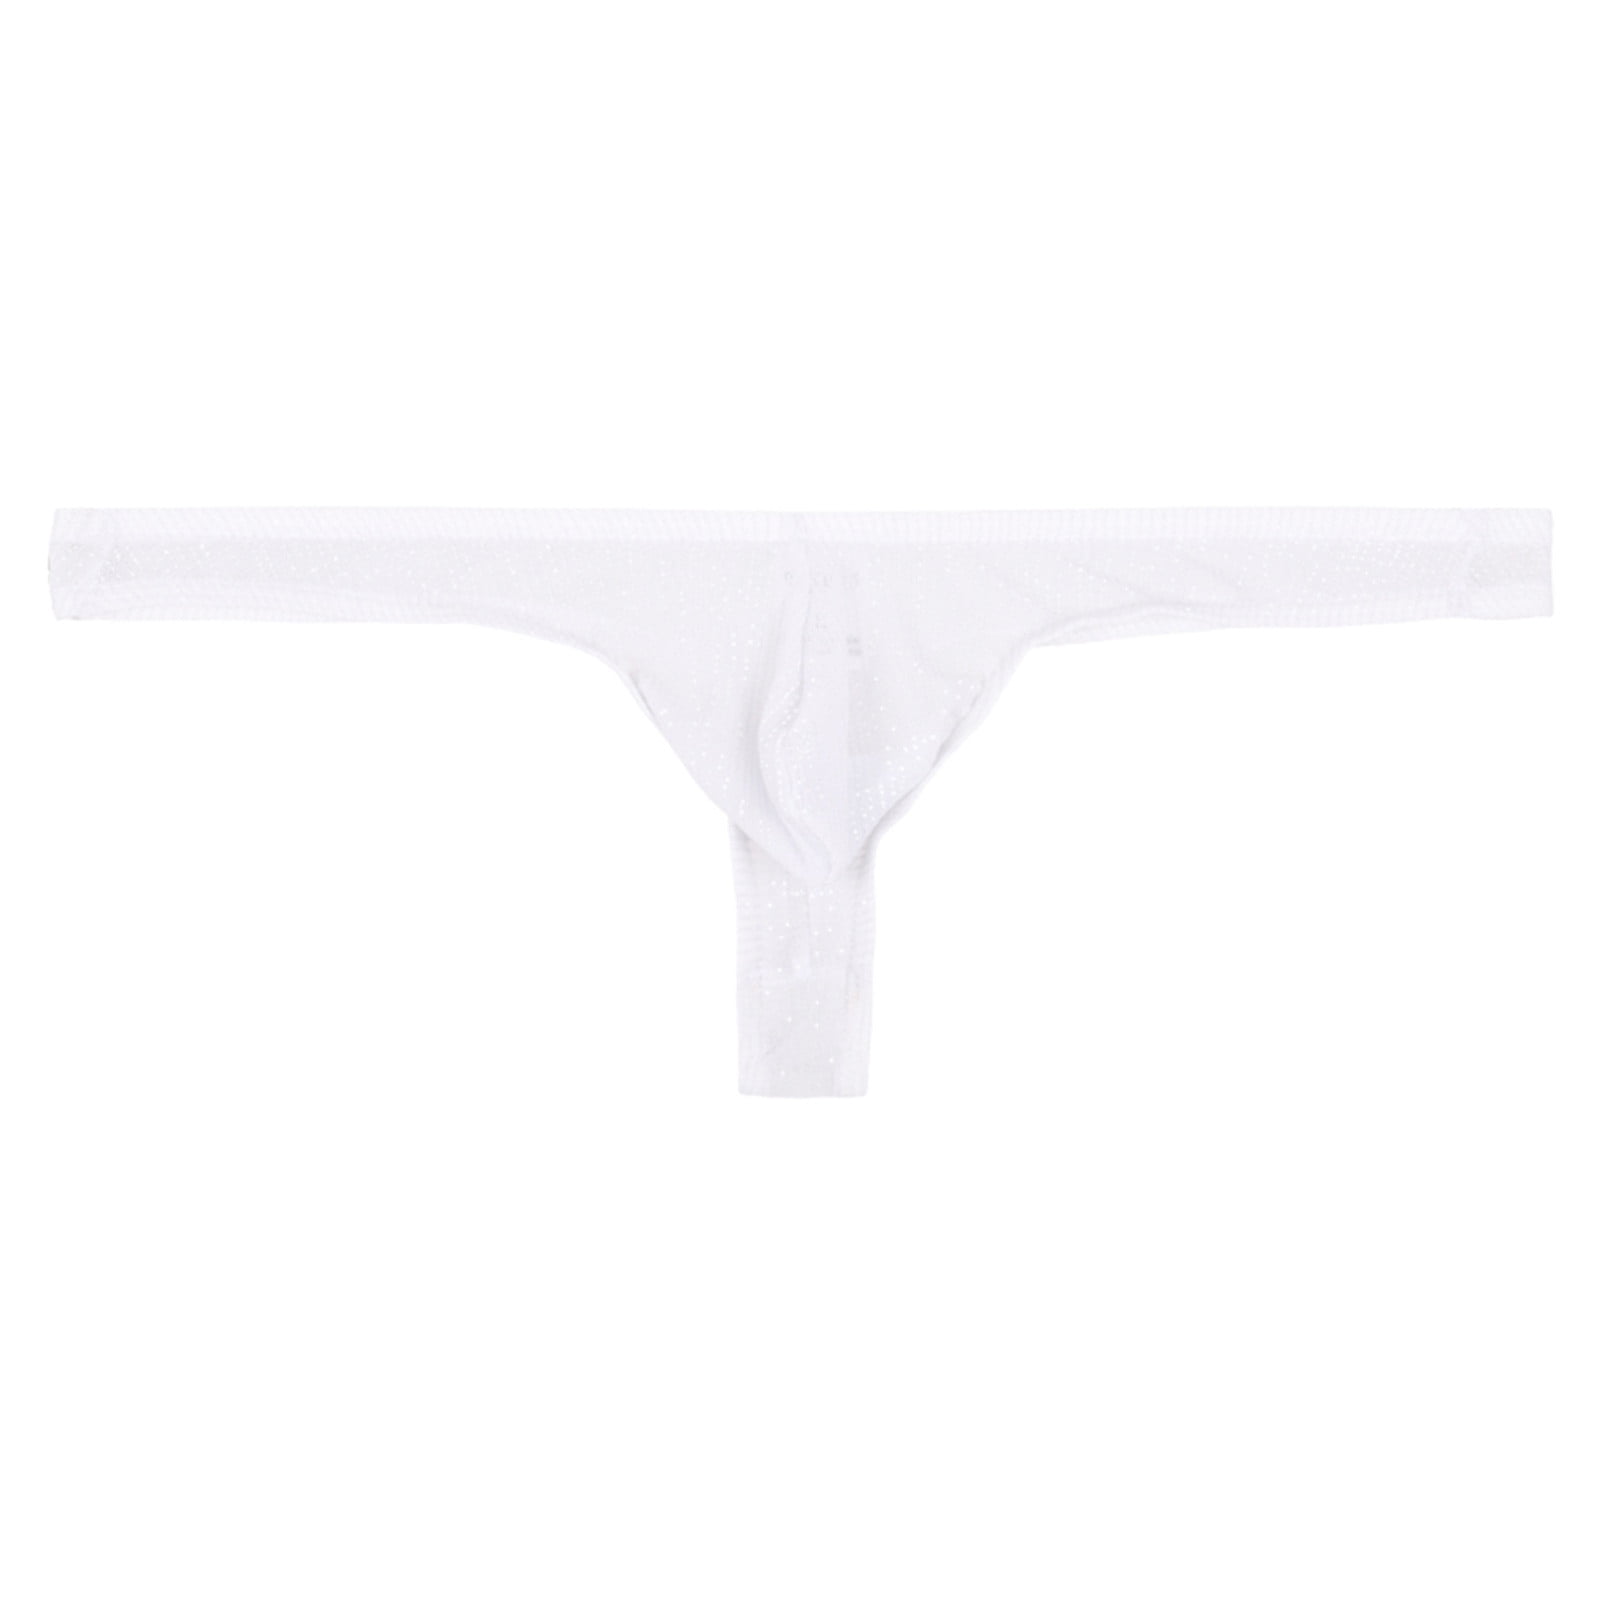 Details about   Women's Shiny Faux Leather Knickers G-string T-back Panties Thongs Underwear 